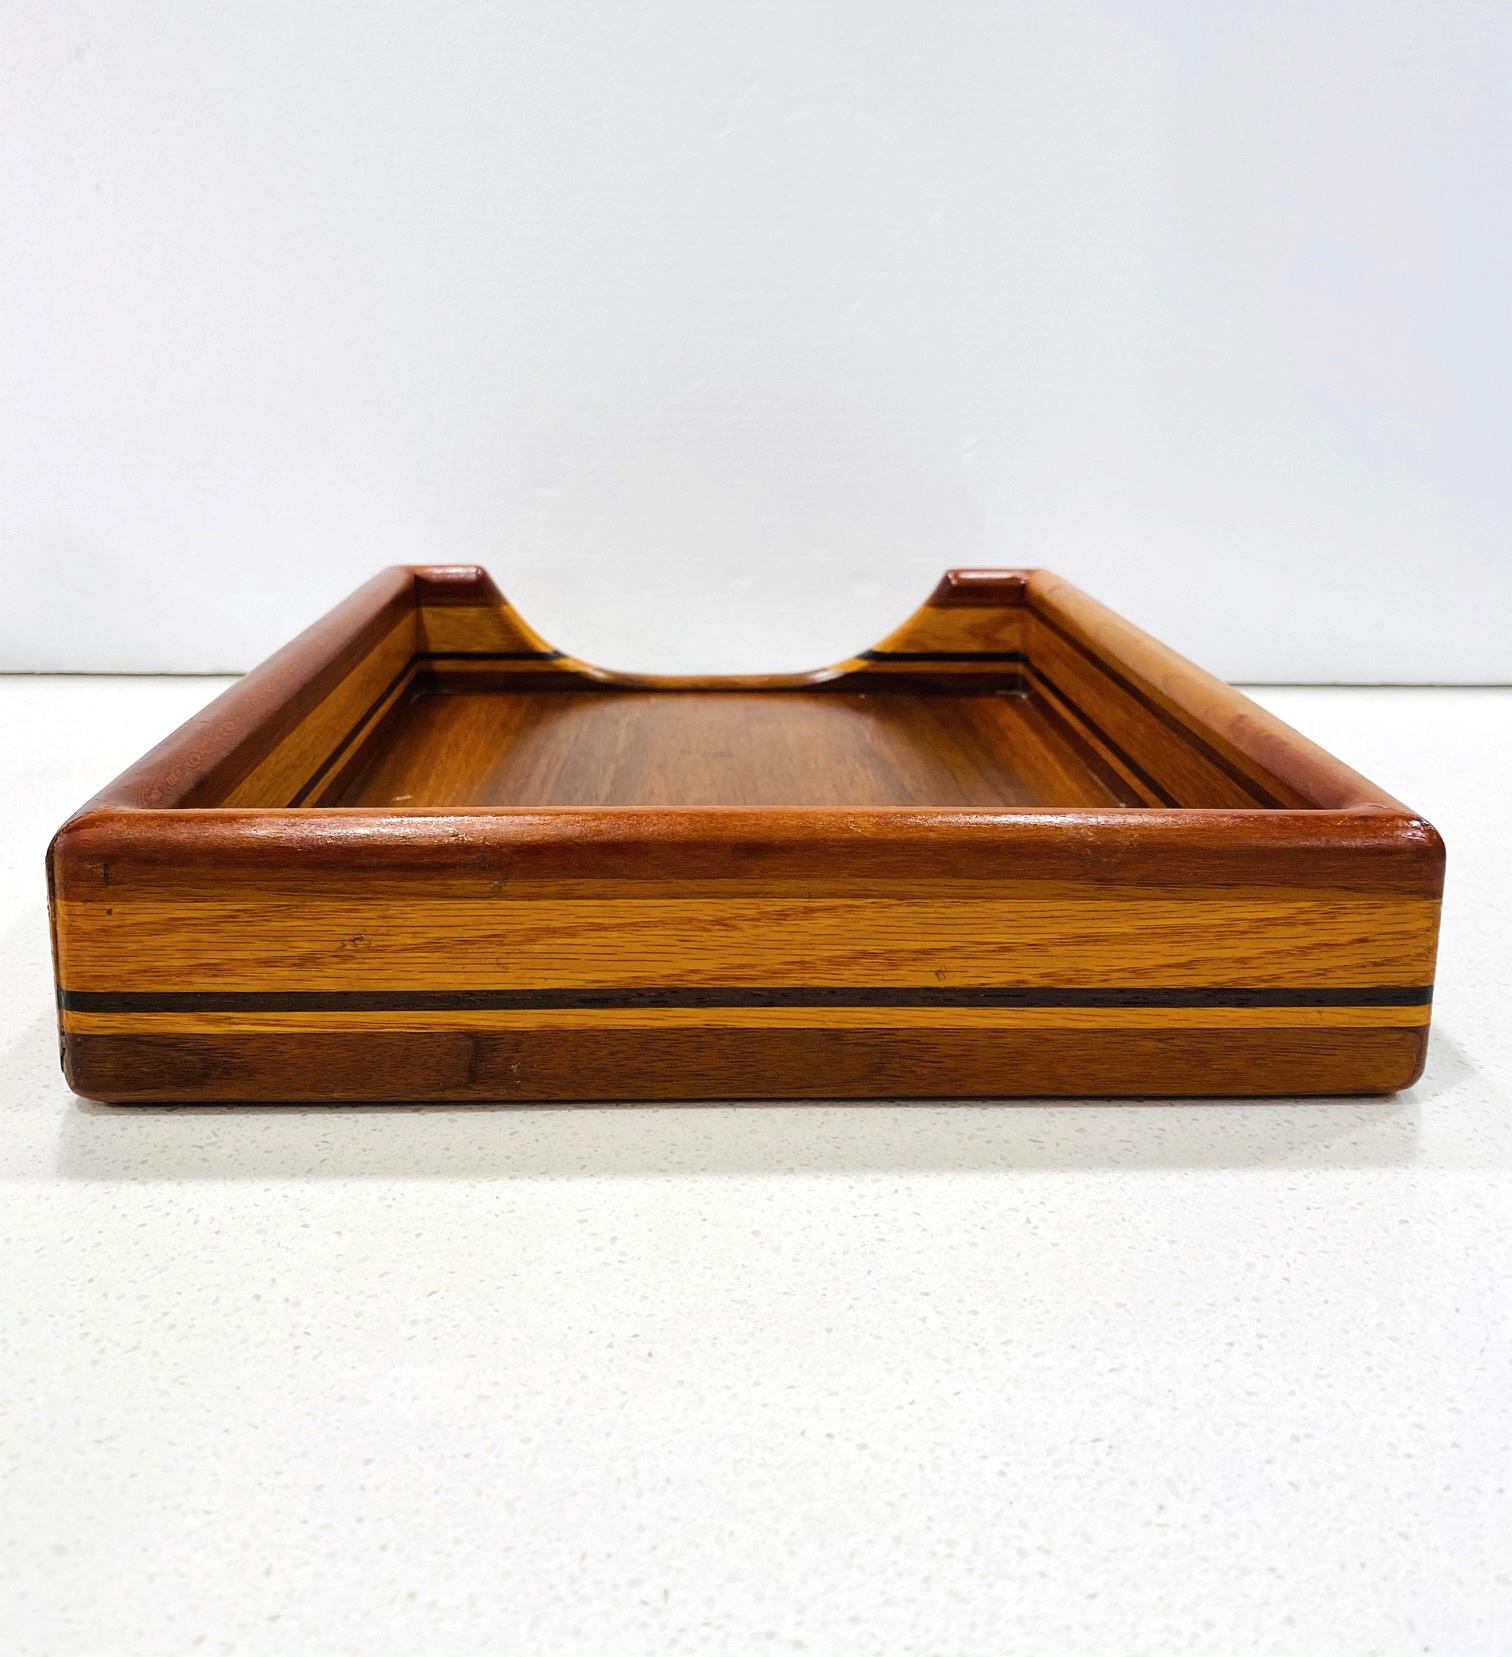 Hand-Crafted Danish Modern Paper Tray and Letter Organizer in Teak, Maple, & Walnut, c. 1970